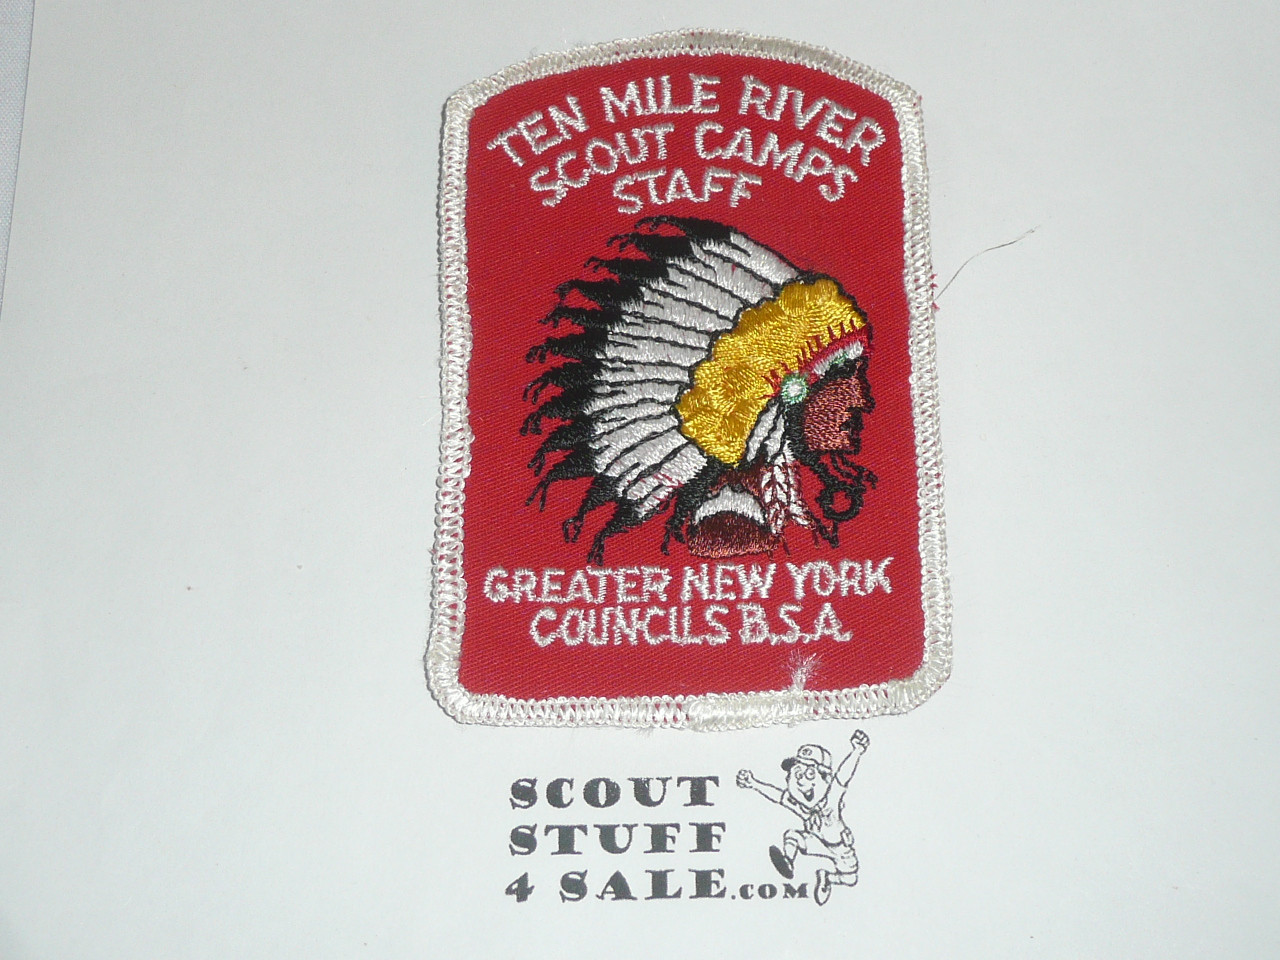 Ten Mile River Camp STAFF Patch, Greater New York Councils, r/e white bdr